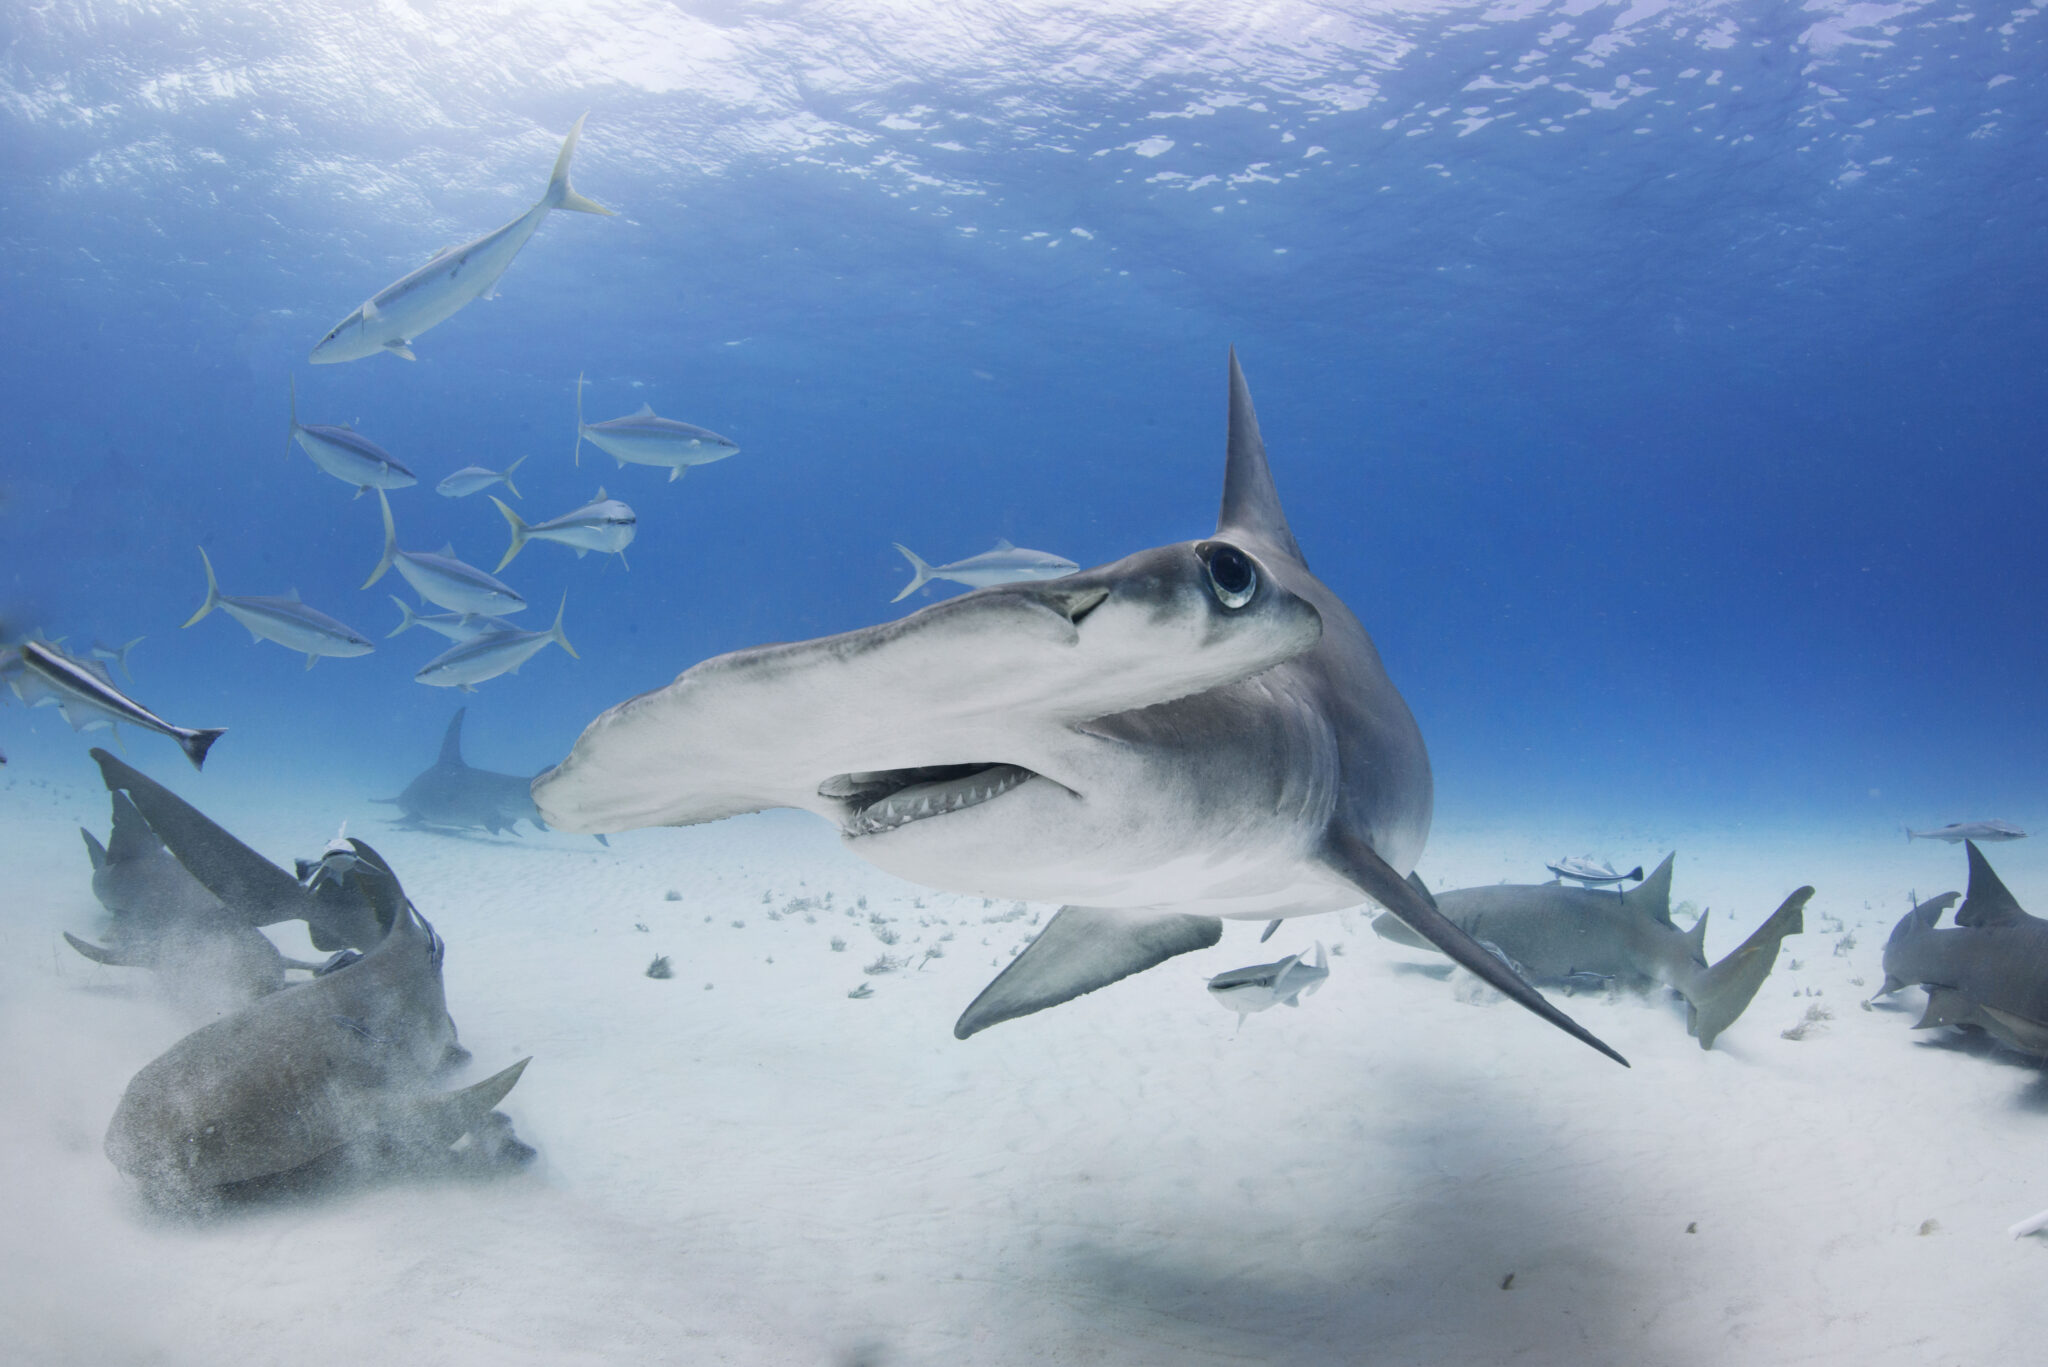 Diving with Hammerhead Sharks - The 5 Best Destinations